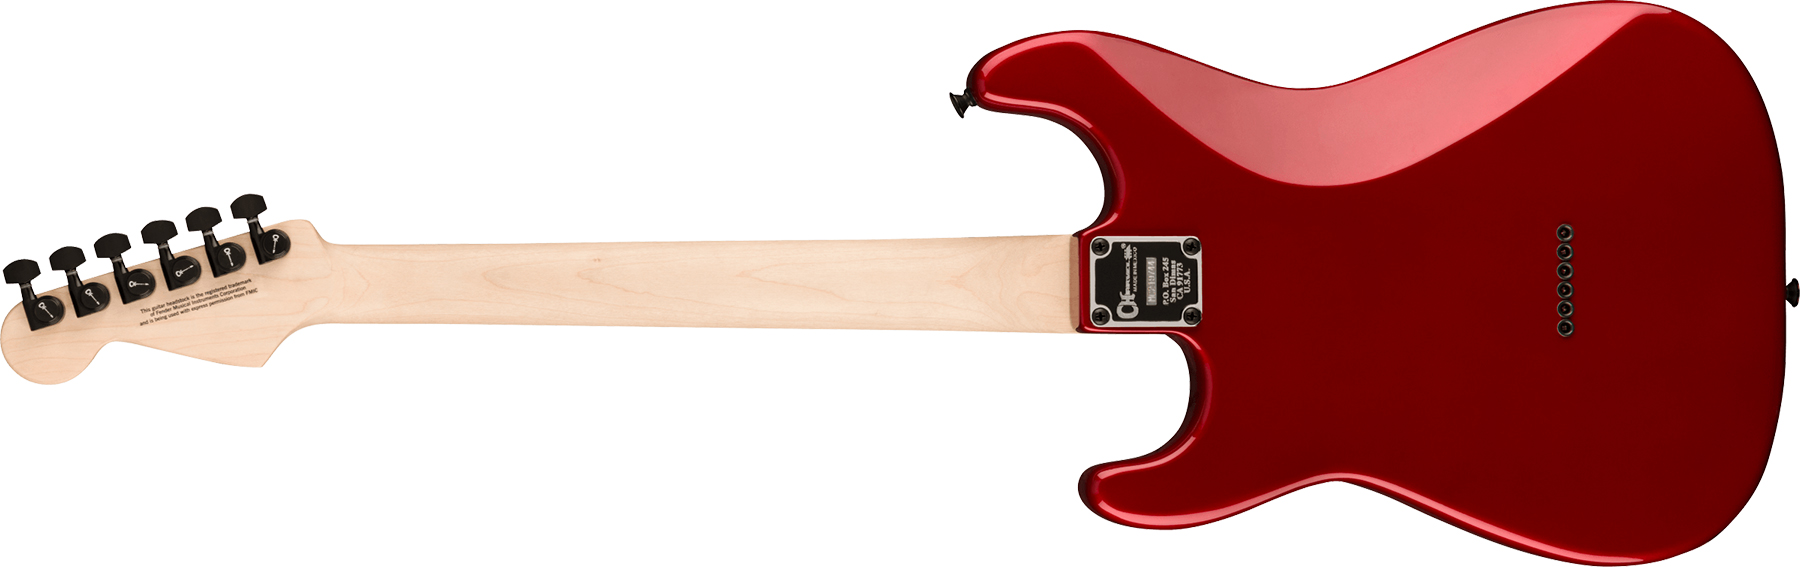 Charvel So-cal Style 1 Hh Ht E Pro-mod 2h Seymour Duncan Eb - Candy Apple Red - E-Gitarre in Str-Form - Variation 1